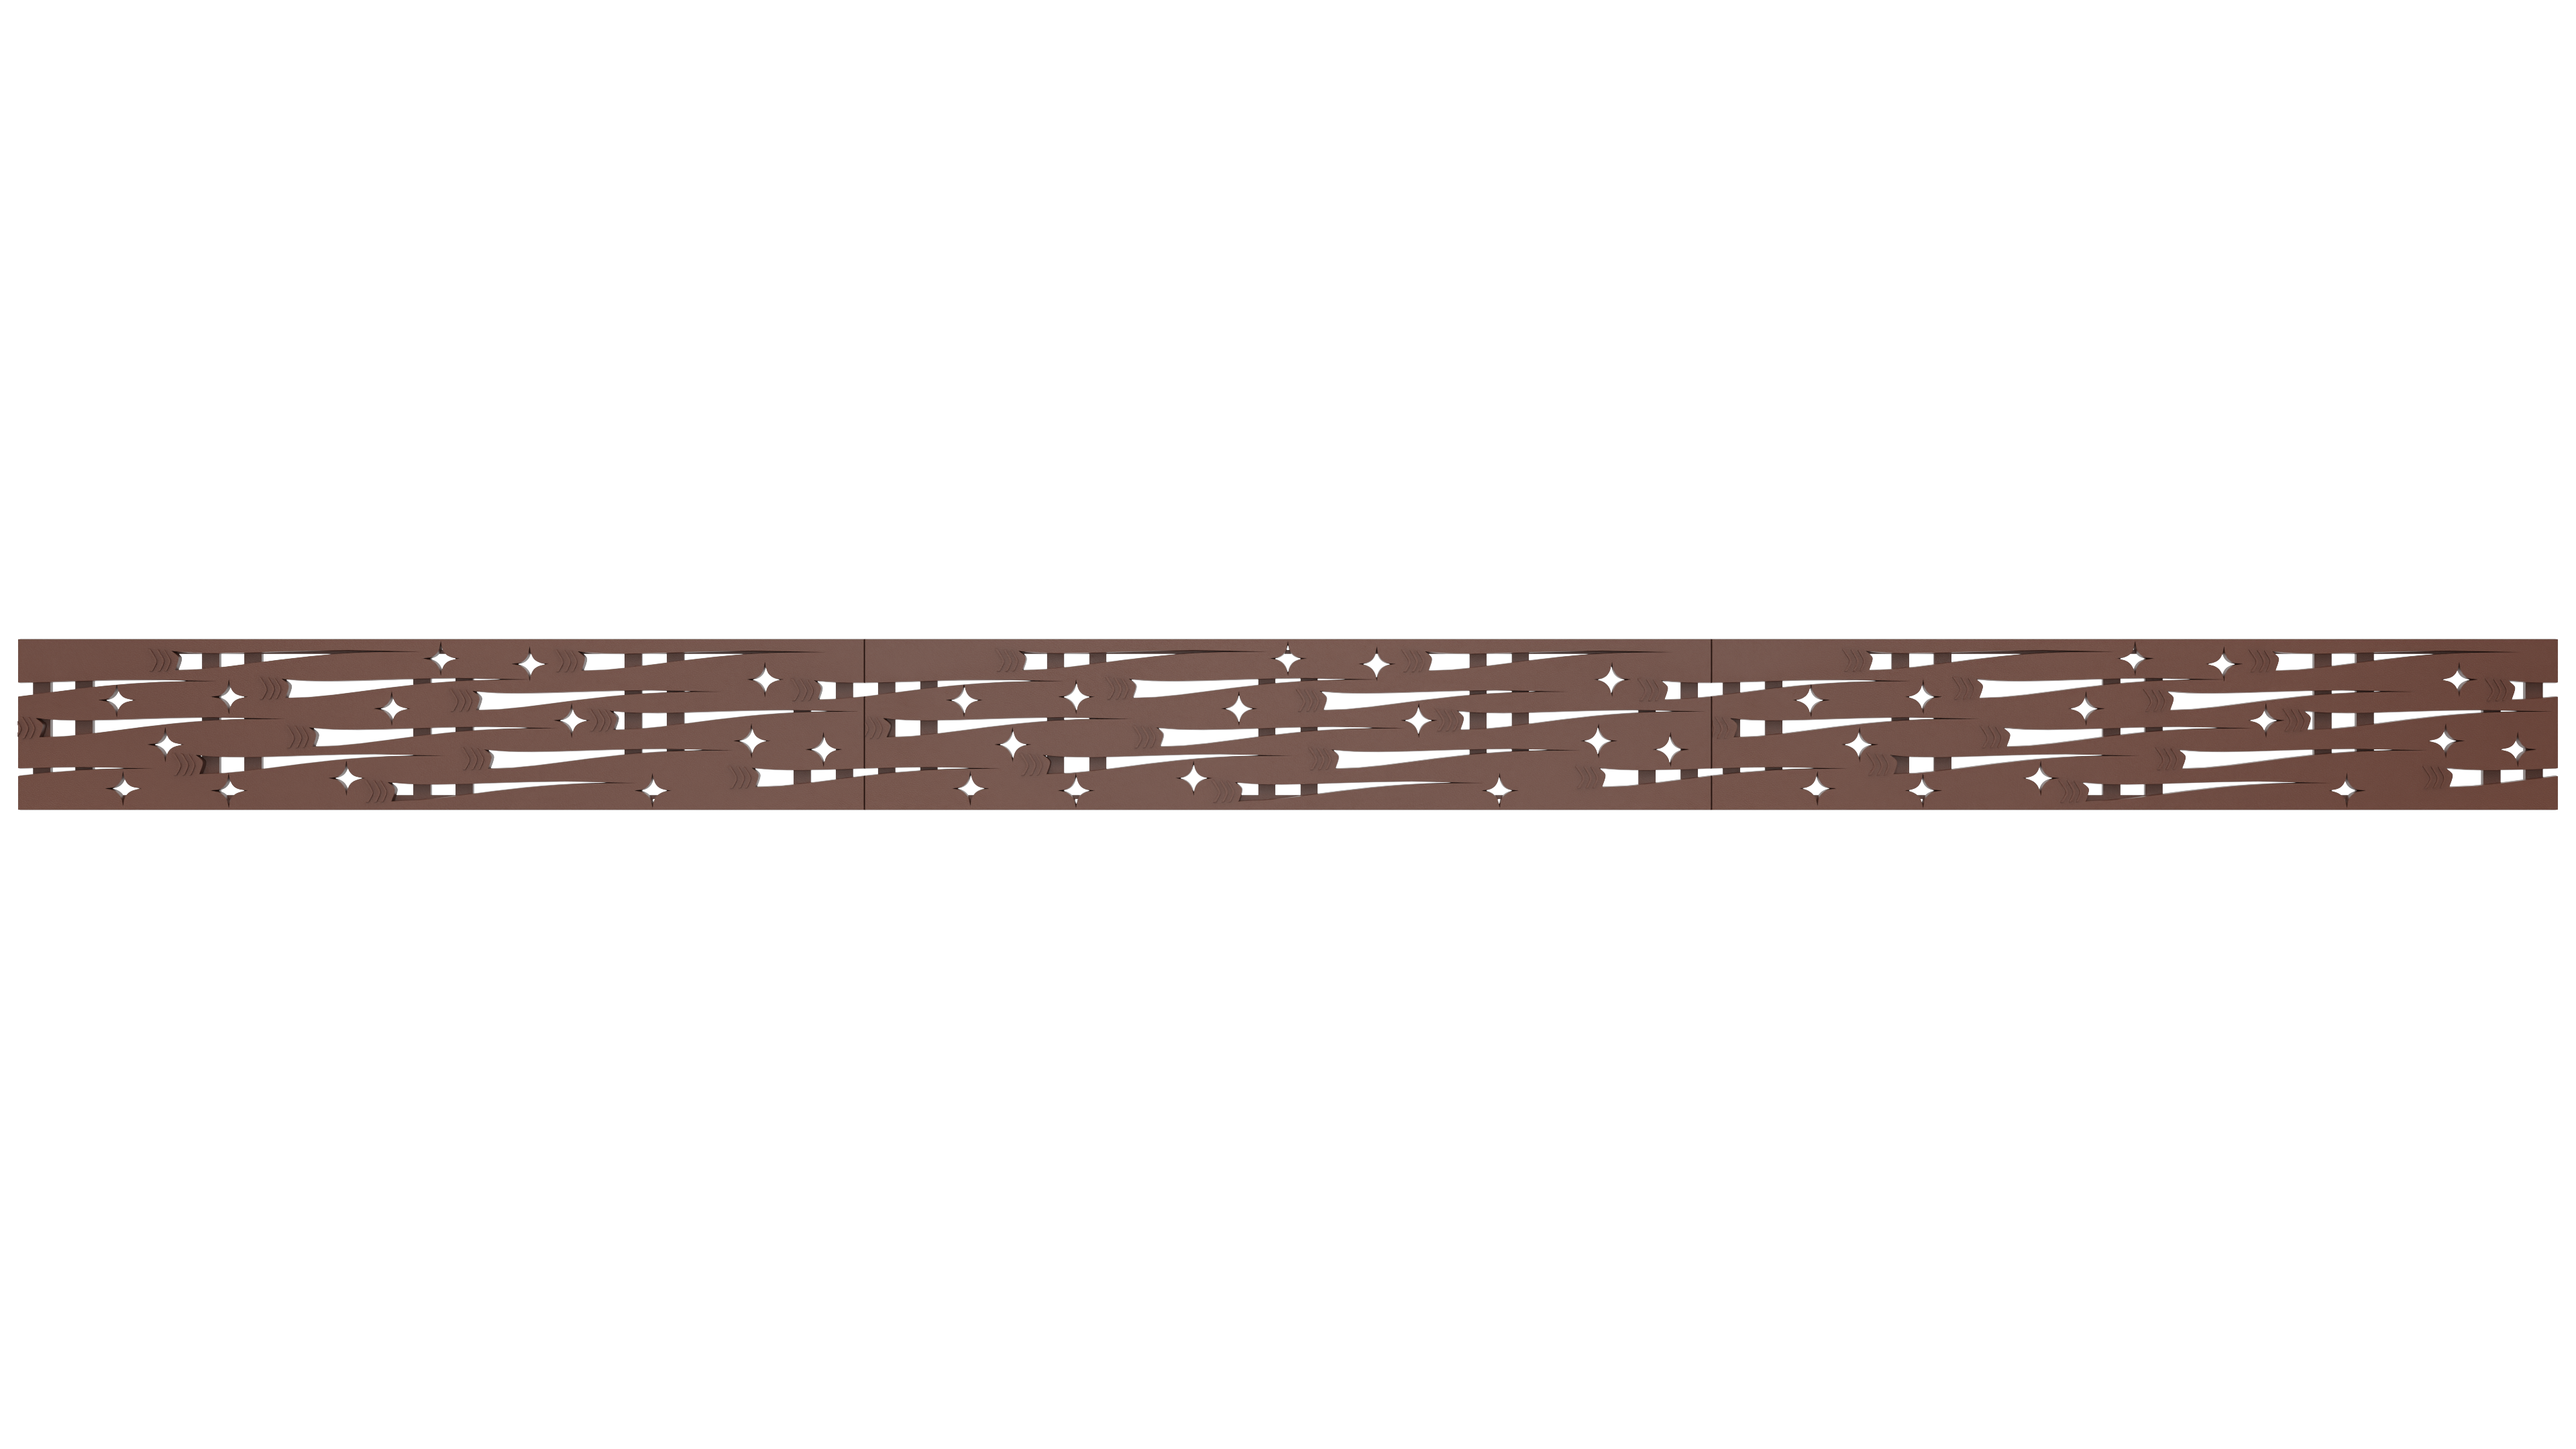 Top view of 5x24 rendered grate